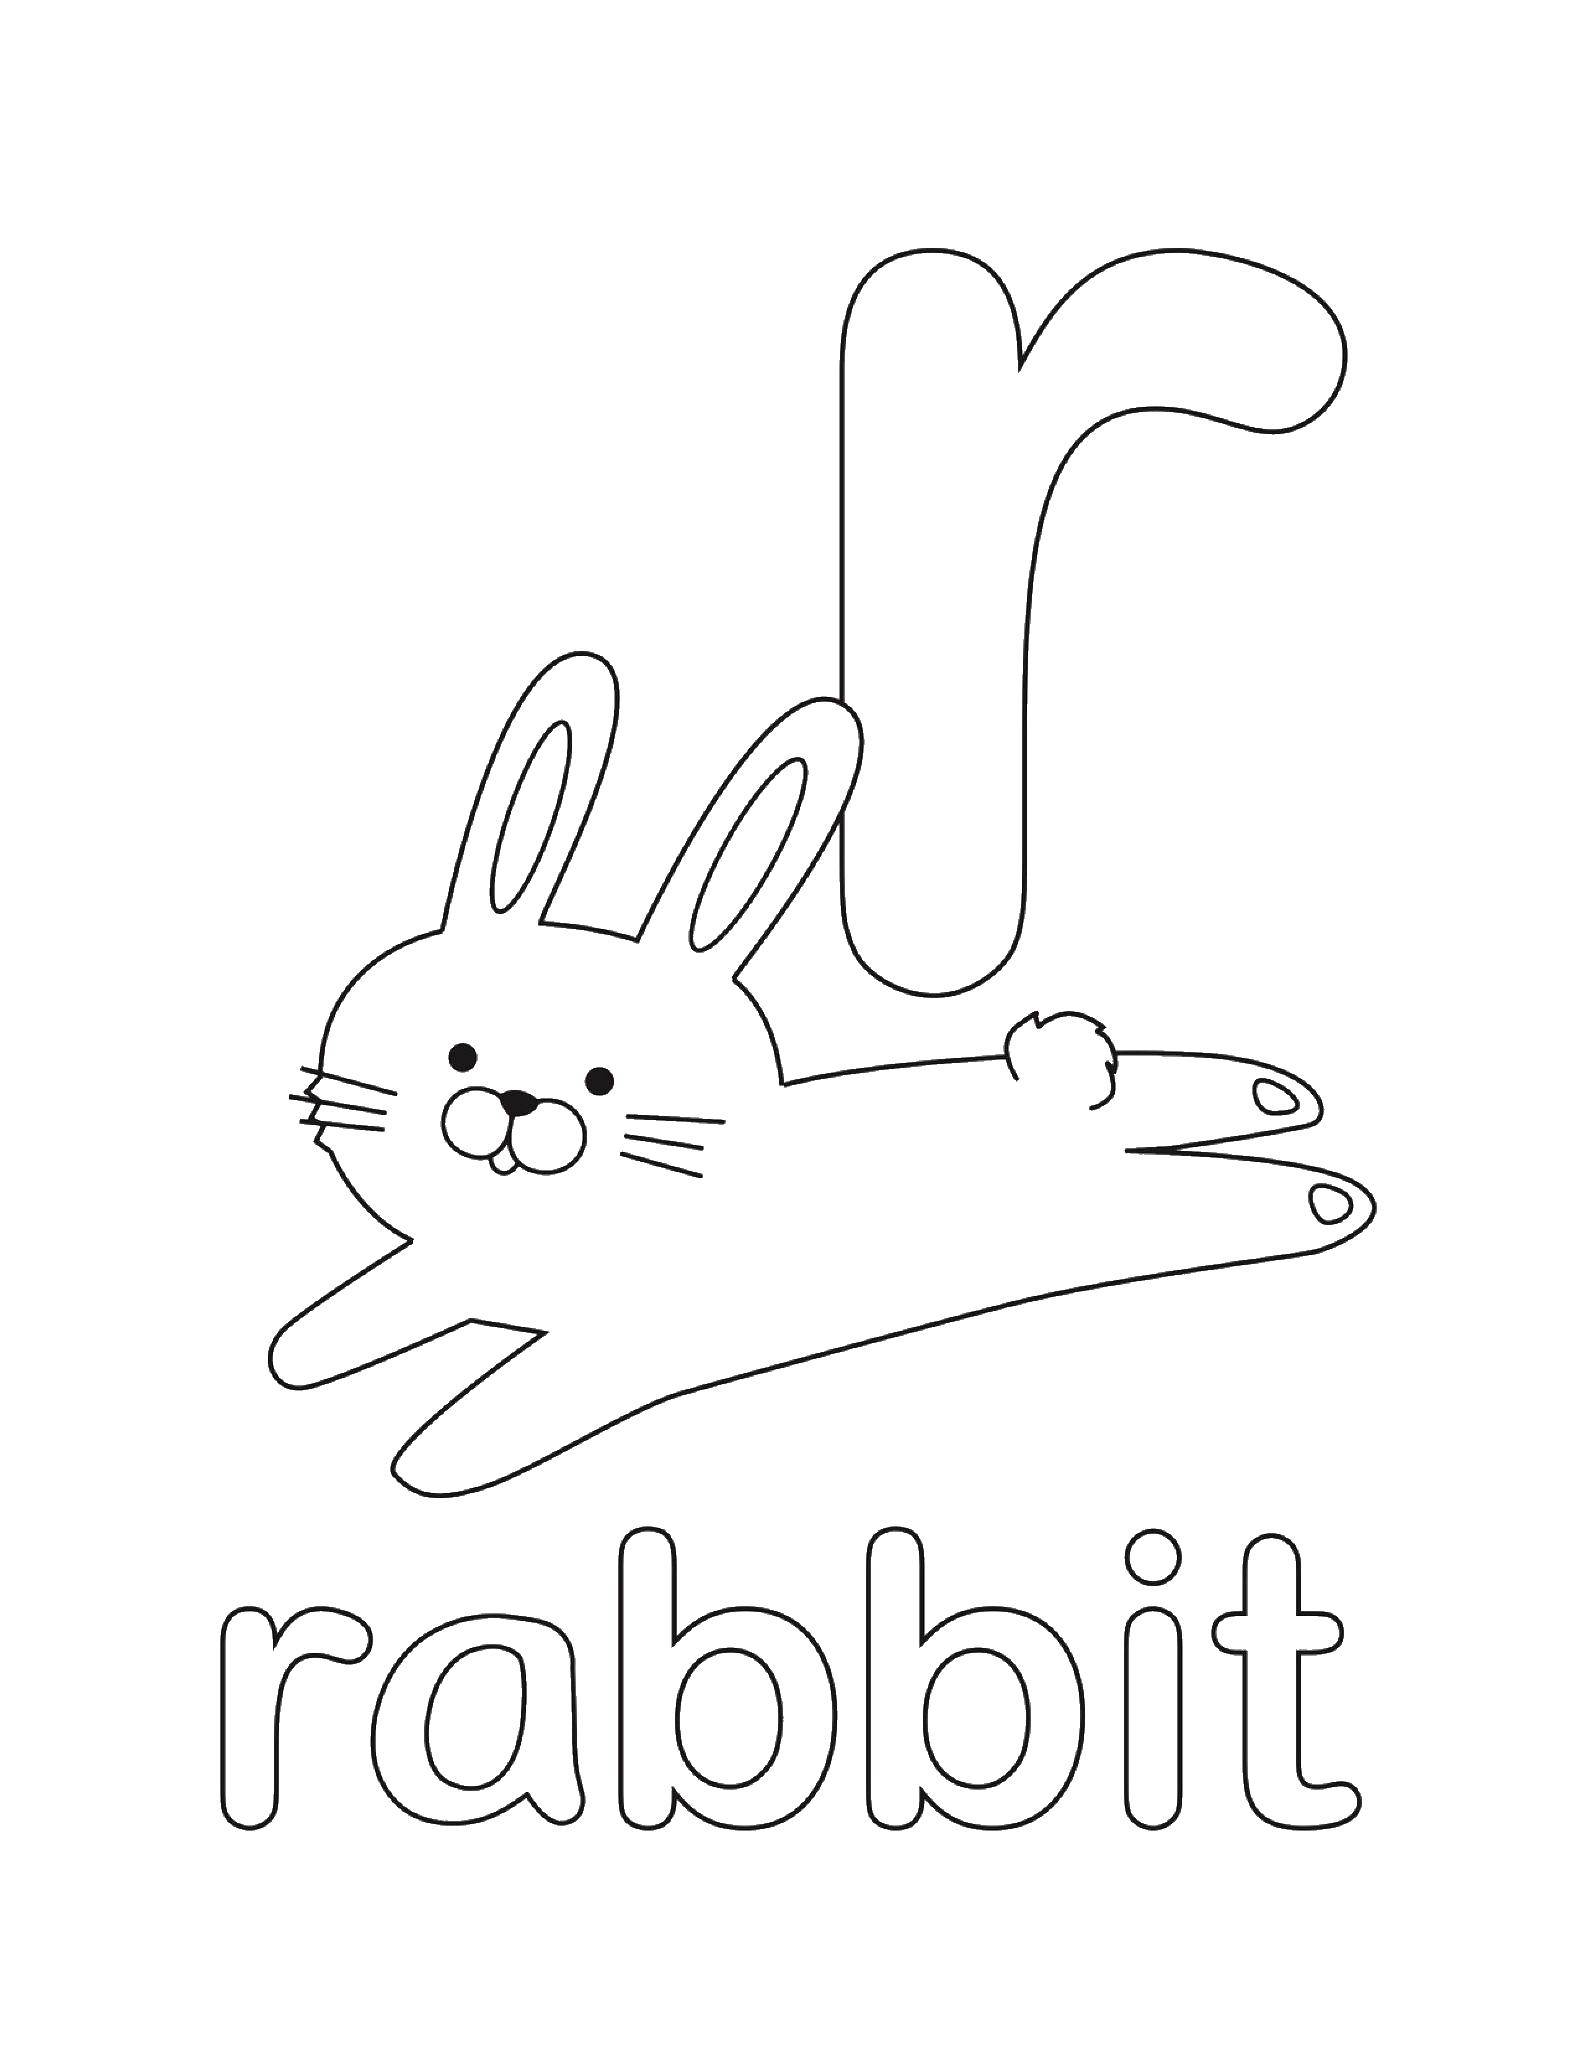 Coloring To rabbit. Category English words. Tags:  English.